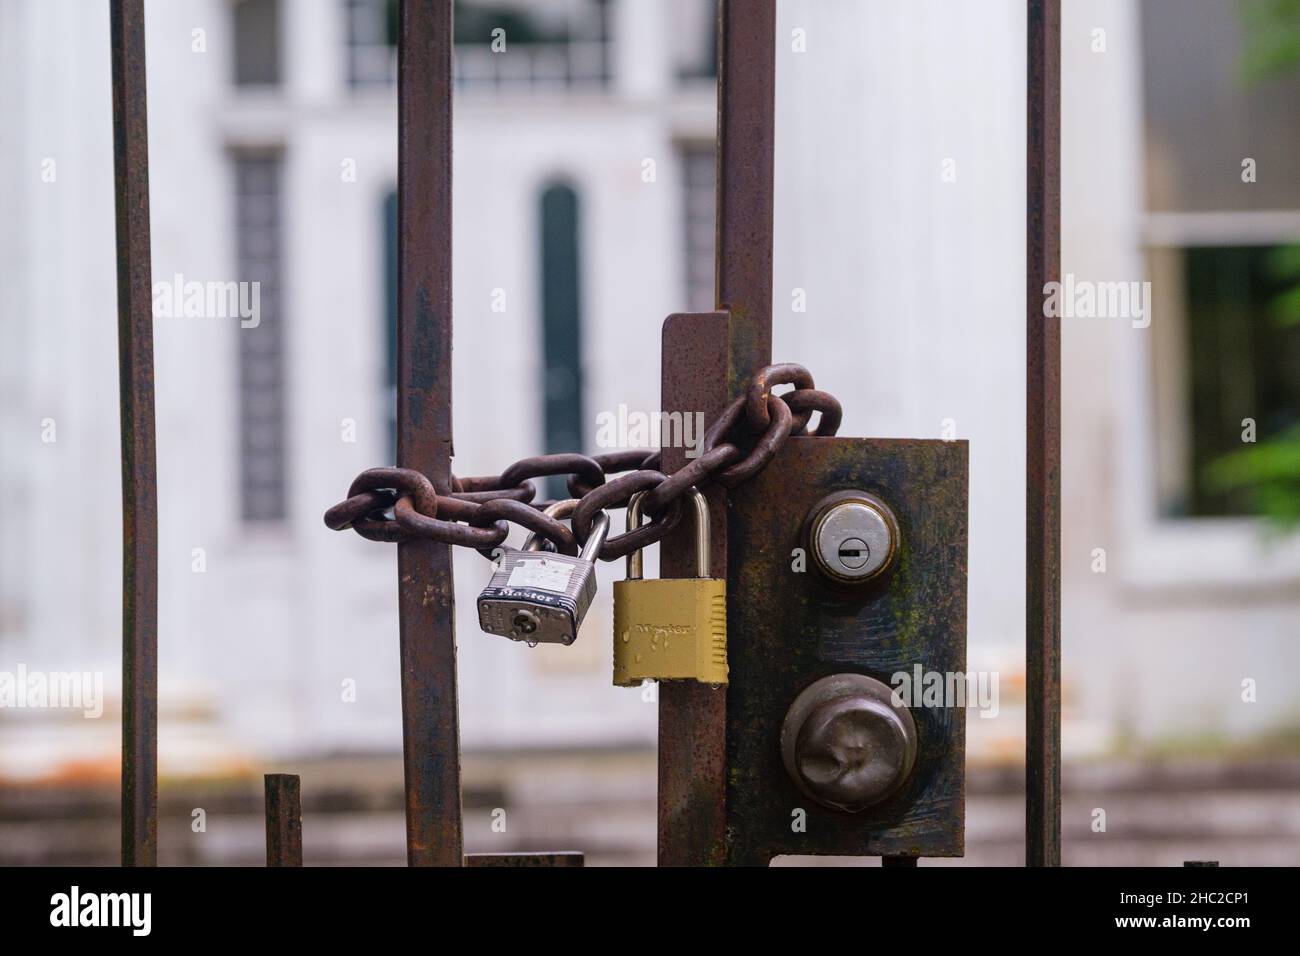 NEW ORLEANS, LA, USA - JUNE 23, 2020 - Pair of locks securing a heavy chain on an iron gate Stock Photo